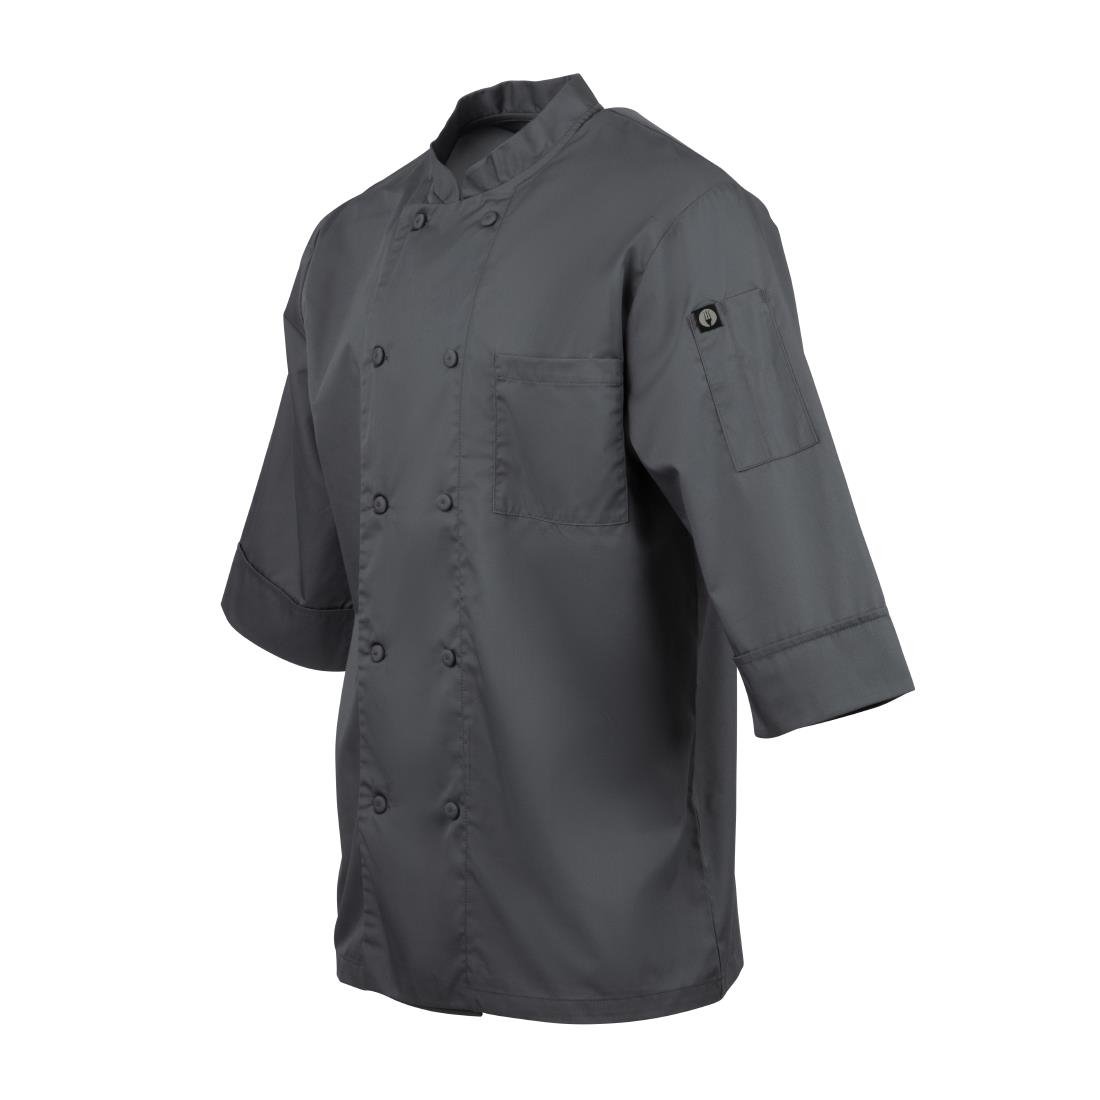 A934-S Chef Works Unisex Chefs Jacket Grey S JD Catering Equipment Solutions Ltd